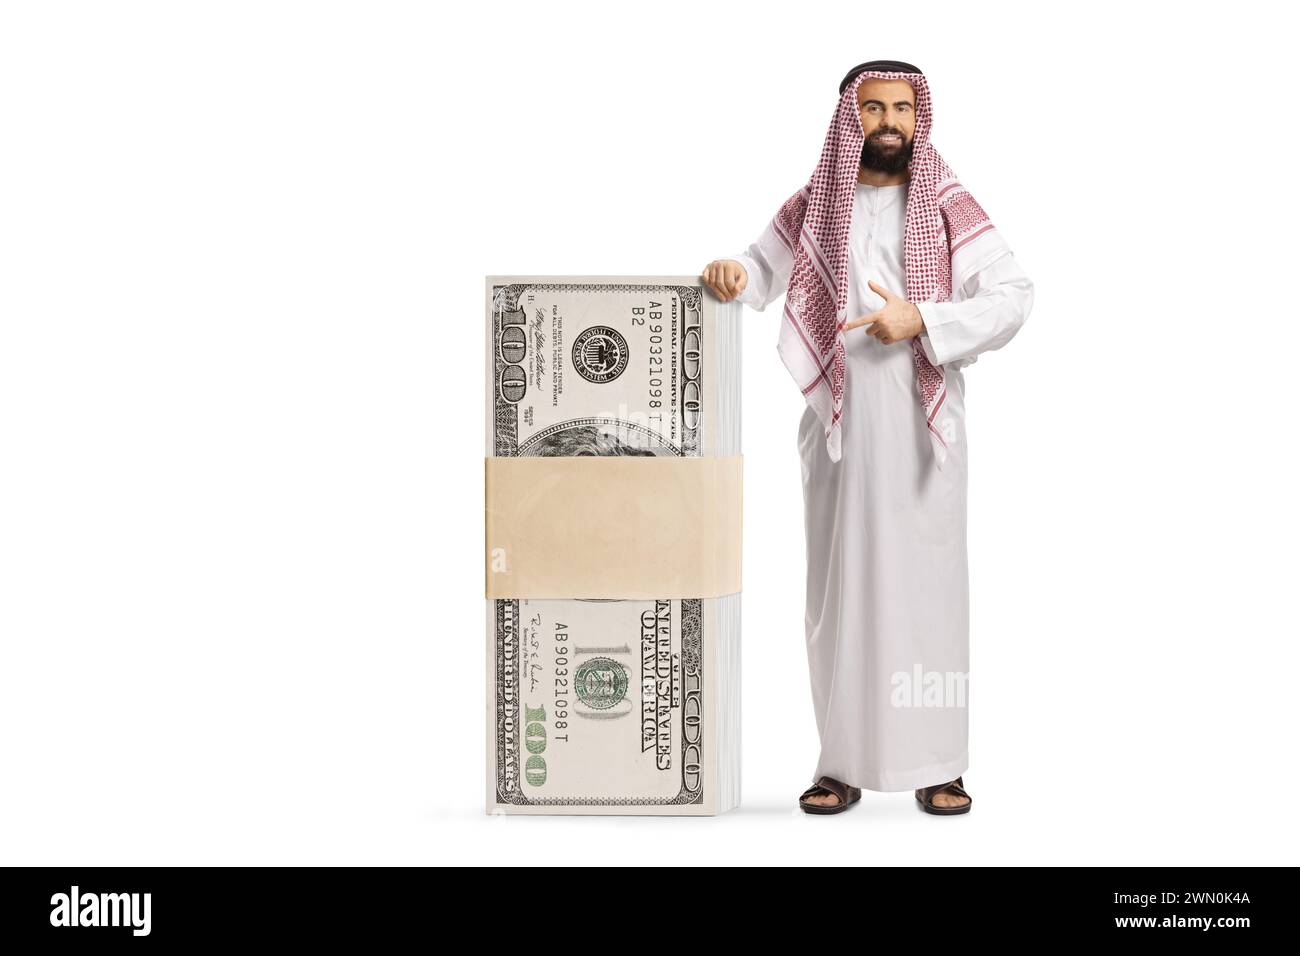 Saudi arab man pointing at a big stack of money isolated on white background Stock Photo